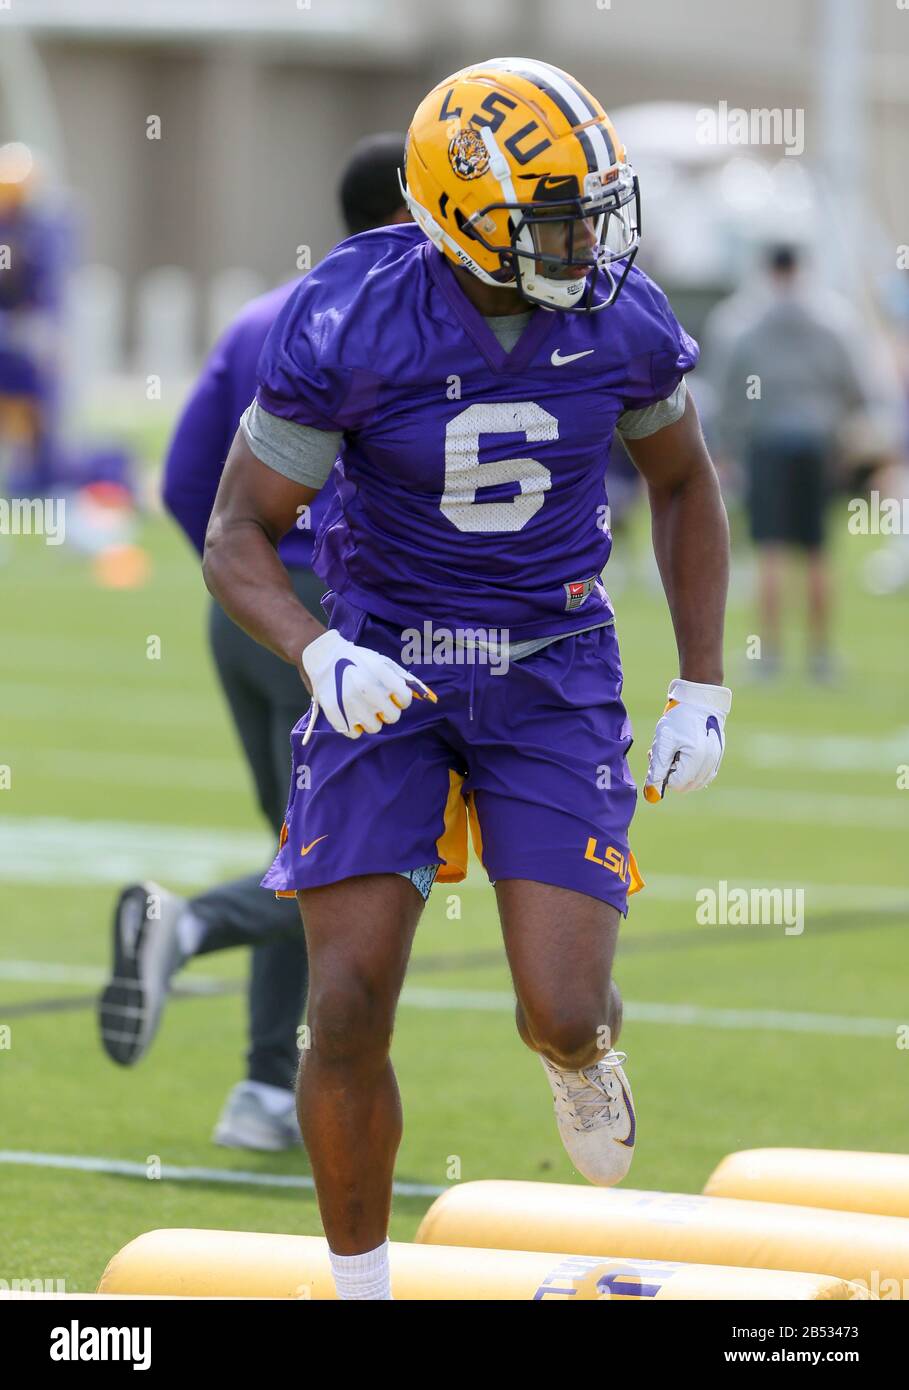 Baton Rouge, LA, USA. 7th Mar, 2020. LSU Linebacker Devonta Lee (6) groes  through a drill during the first day of spring football practice at the  Charles McClendon Practice Facility in Baton